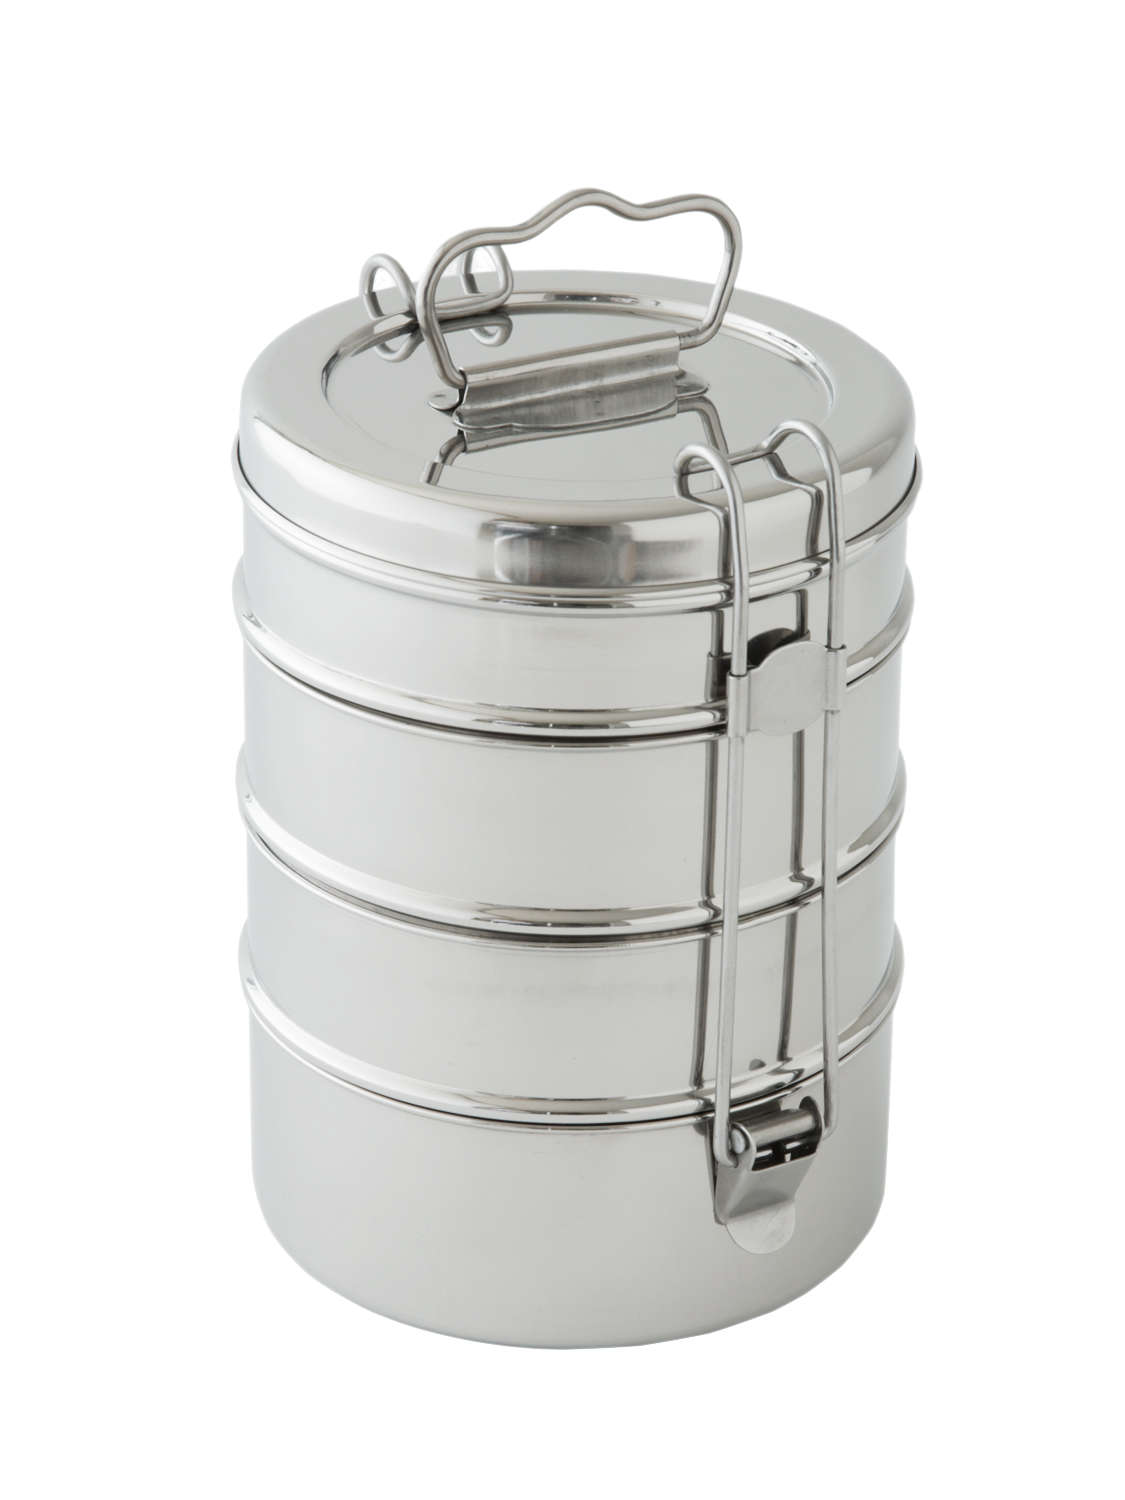 Stainless Steel Lunch Box/Food Container Four Tier Compartment with Handle